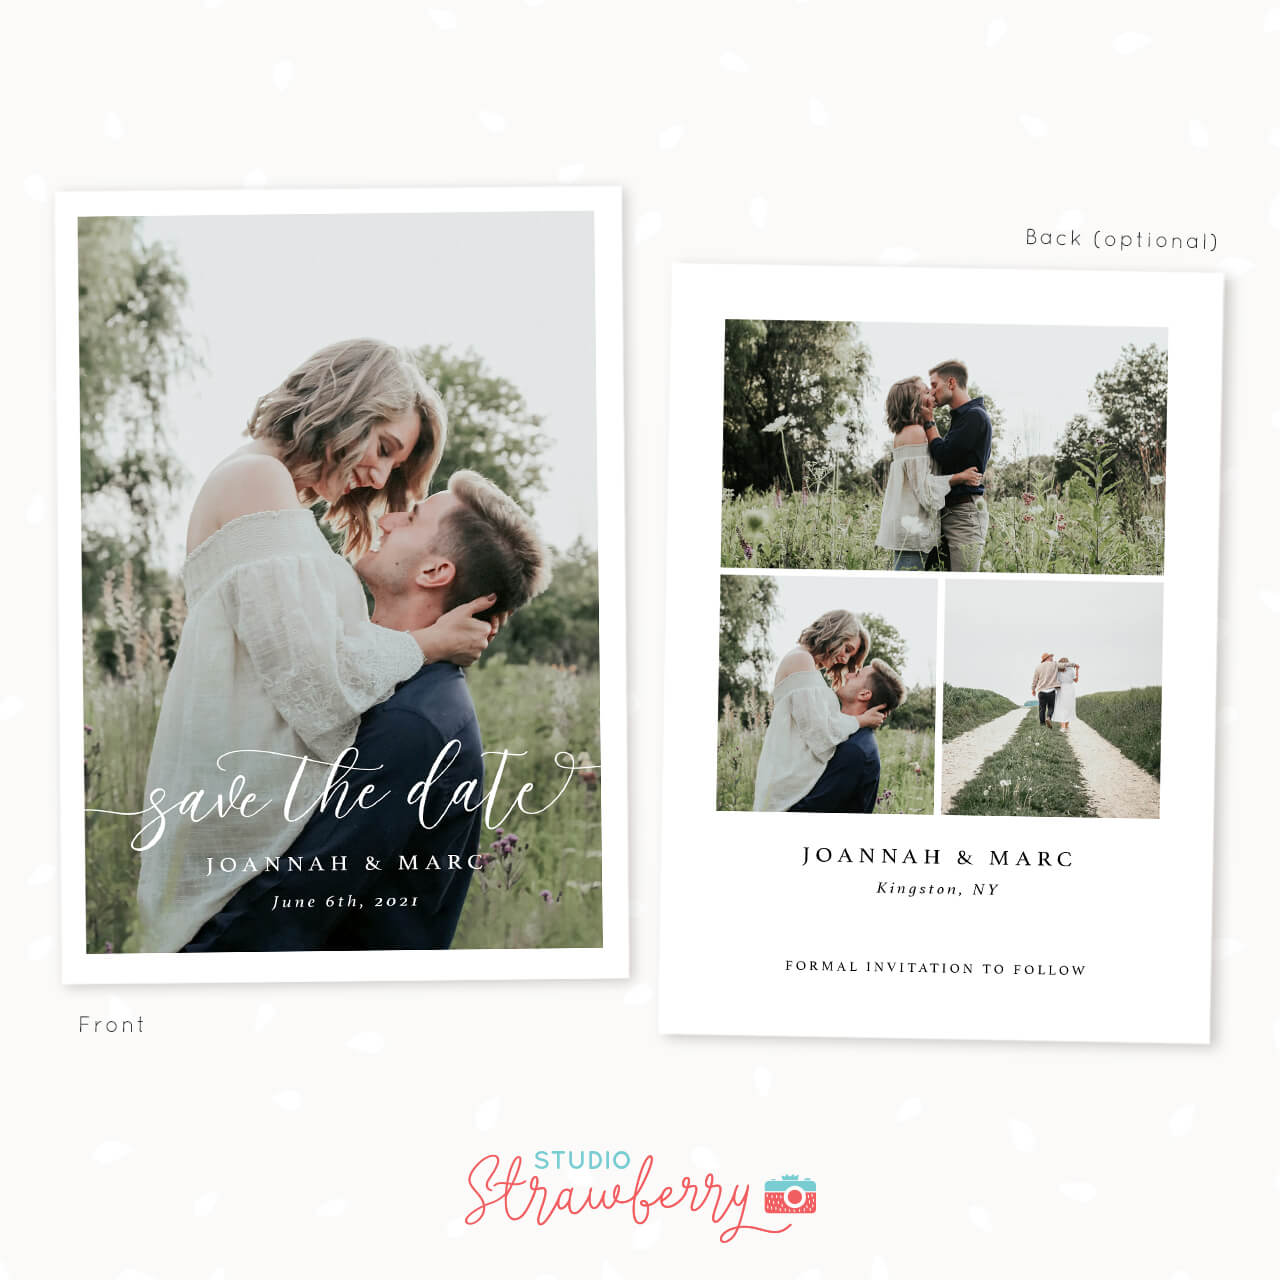 Save the date card photo calligraphy